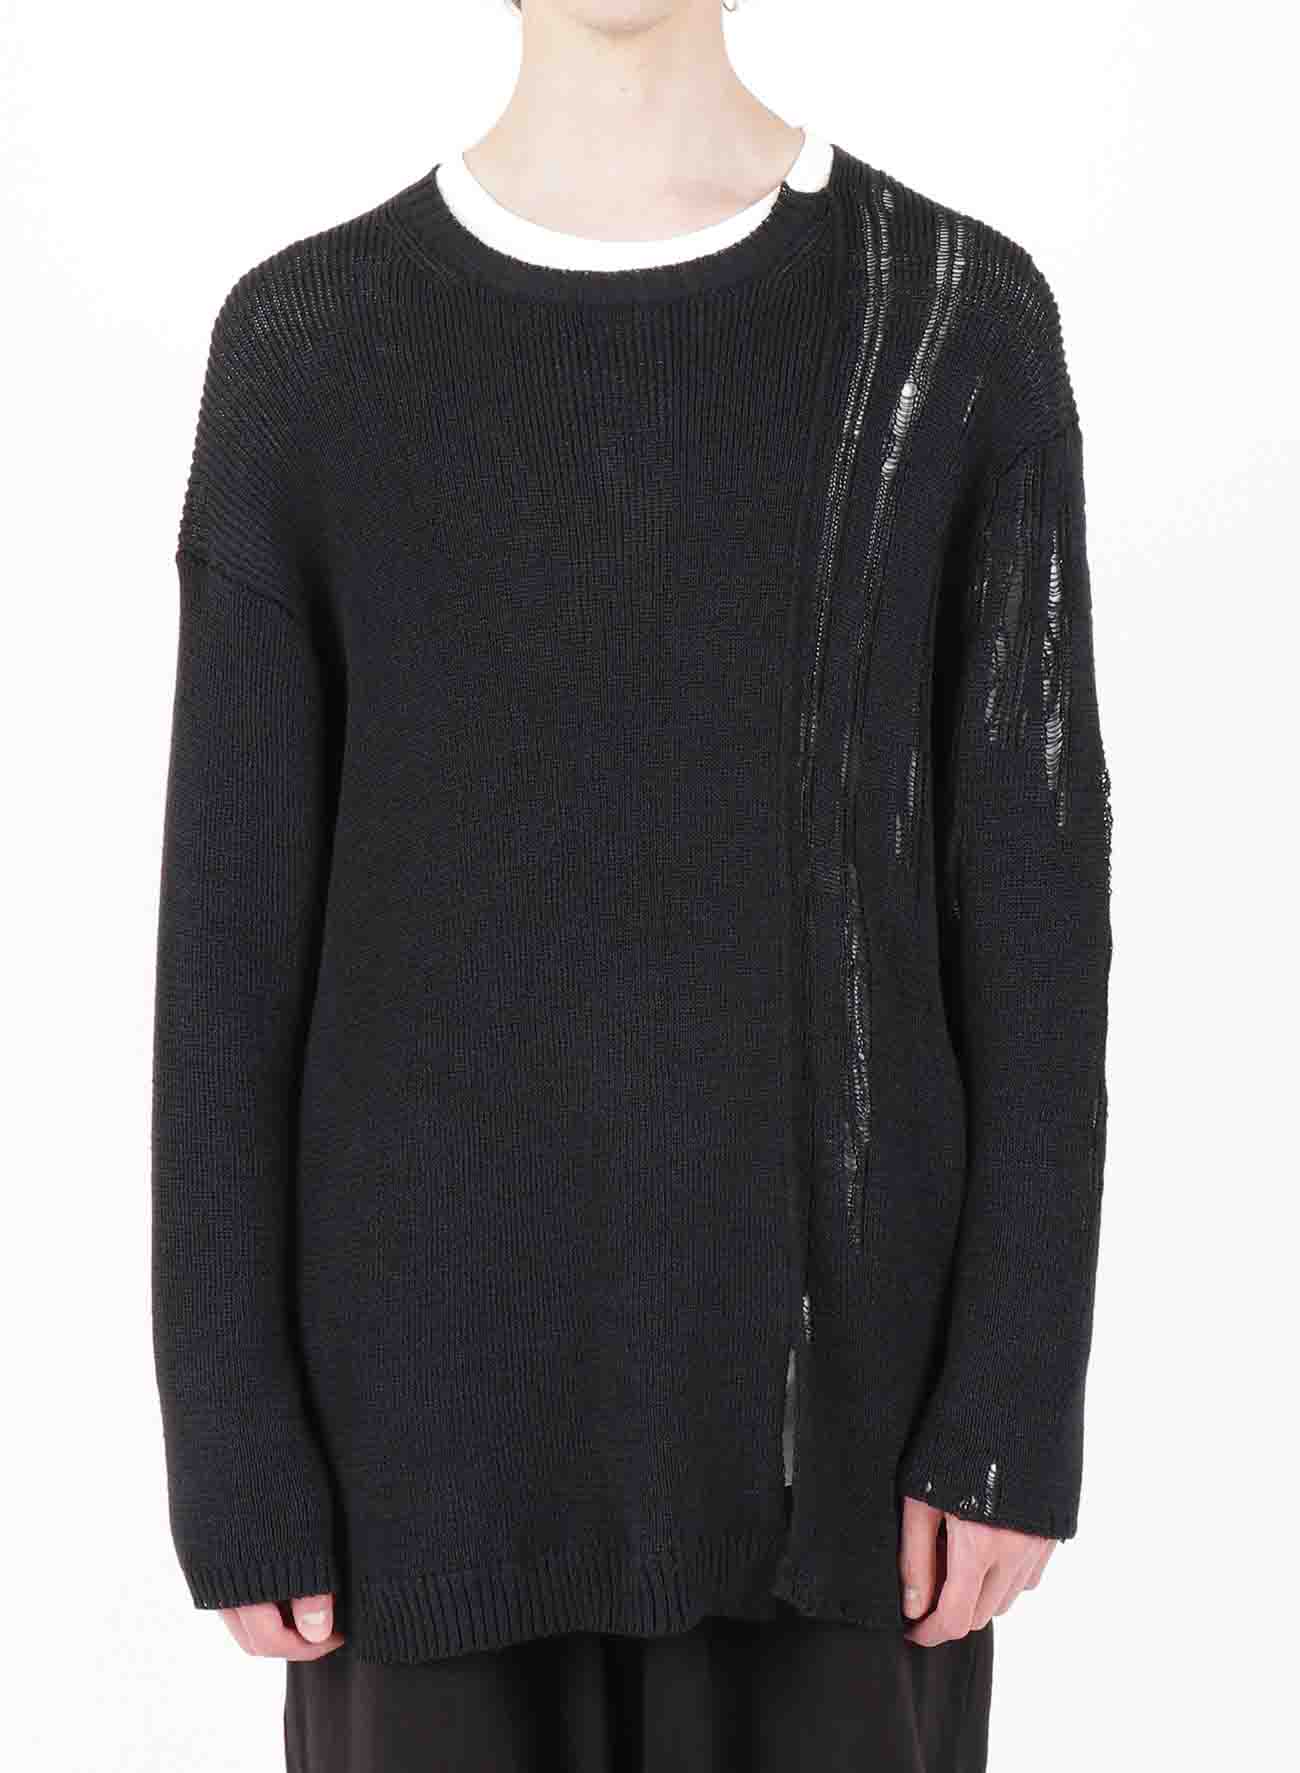 7G RIB + PRINT PATCHED ROUND NECK LONG SLEEVES